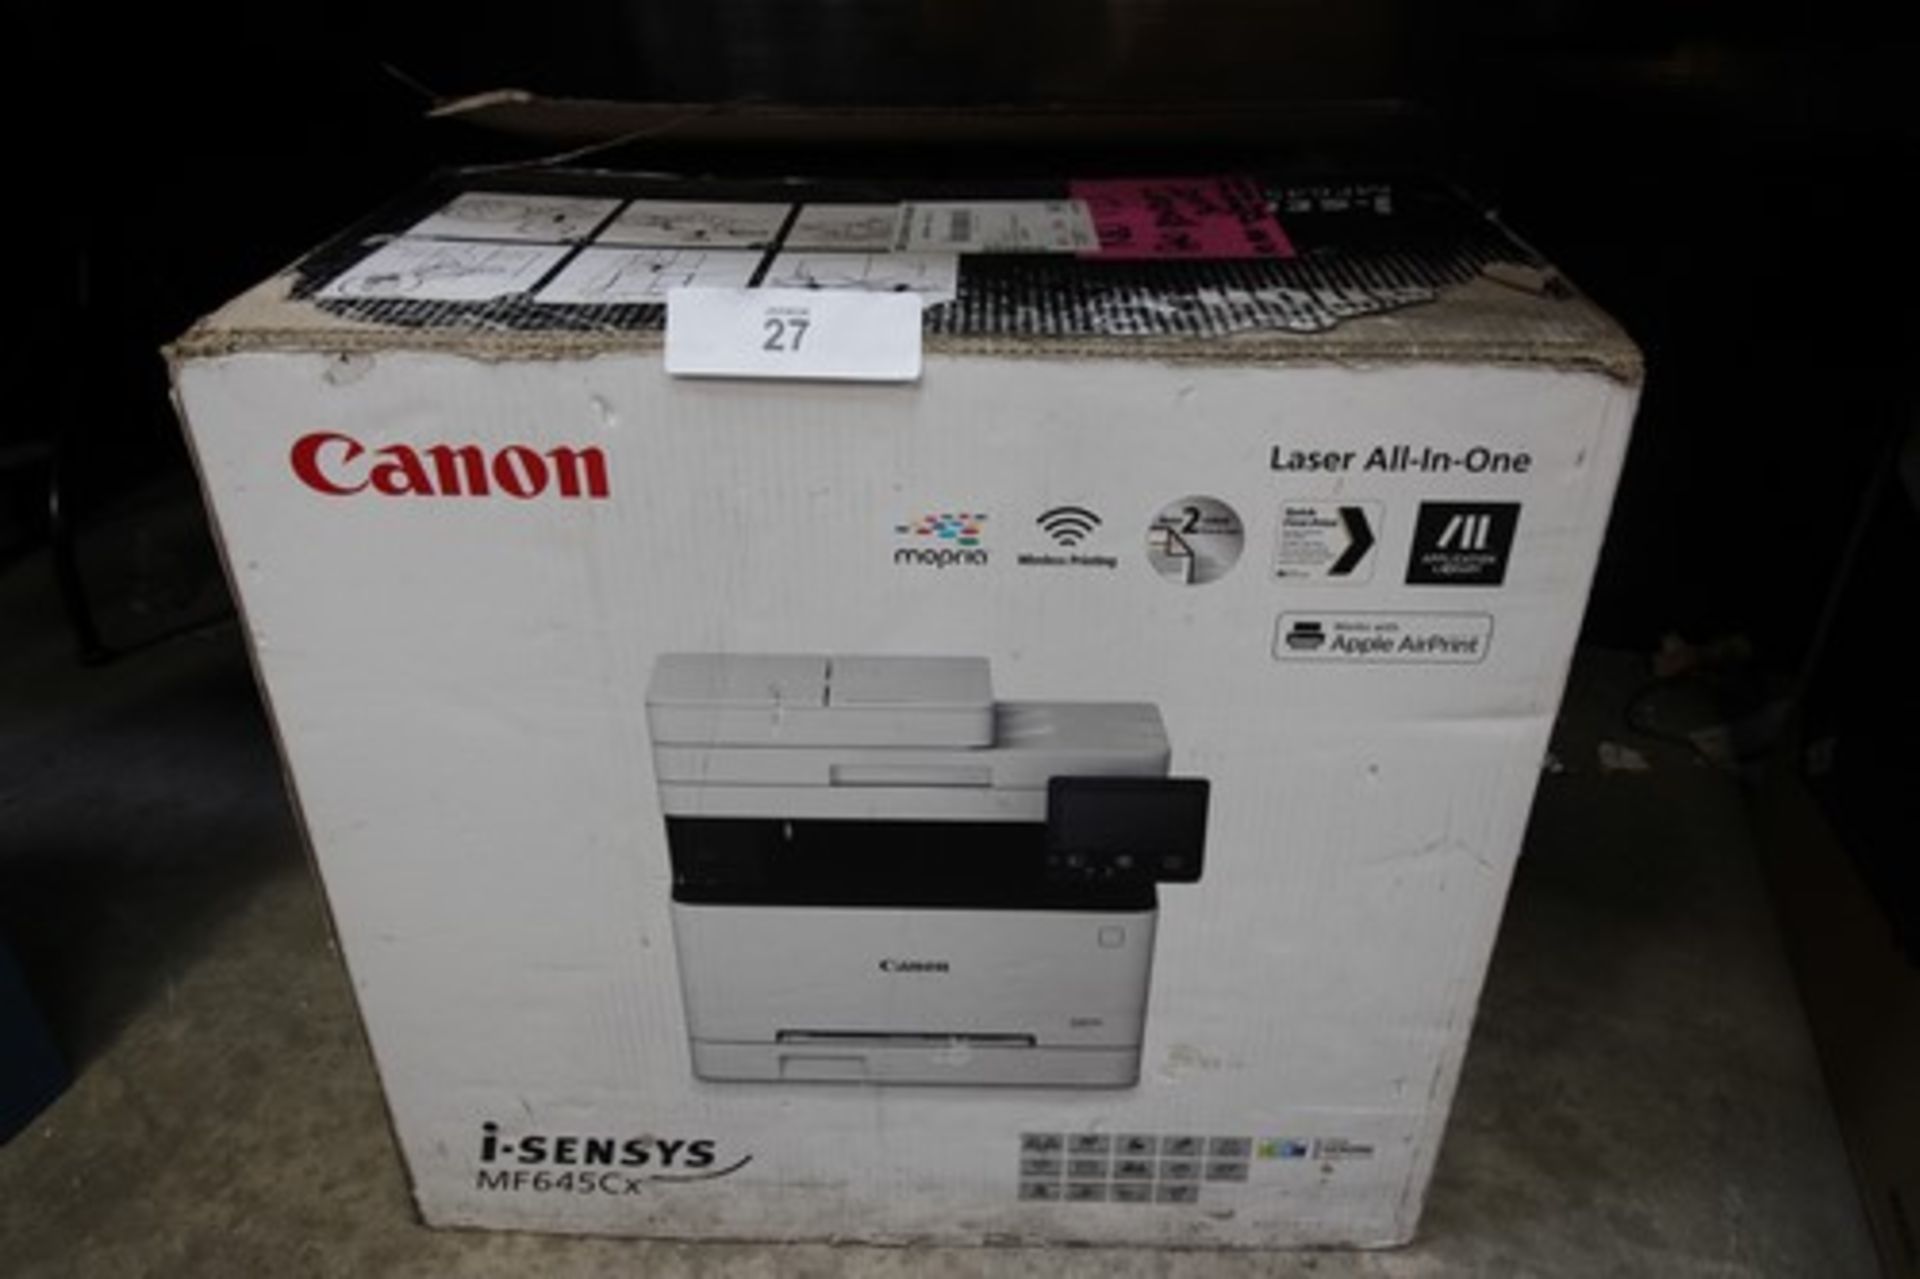 1 x Cannon I.Sensys all in one MF645CX laser printer, ref. No. 3102C026AA, dusty from storage - - Image 2 of 3